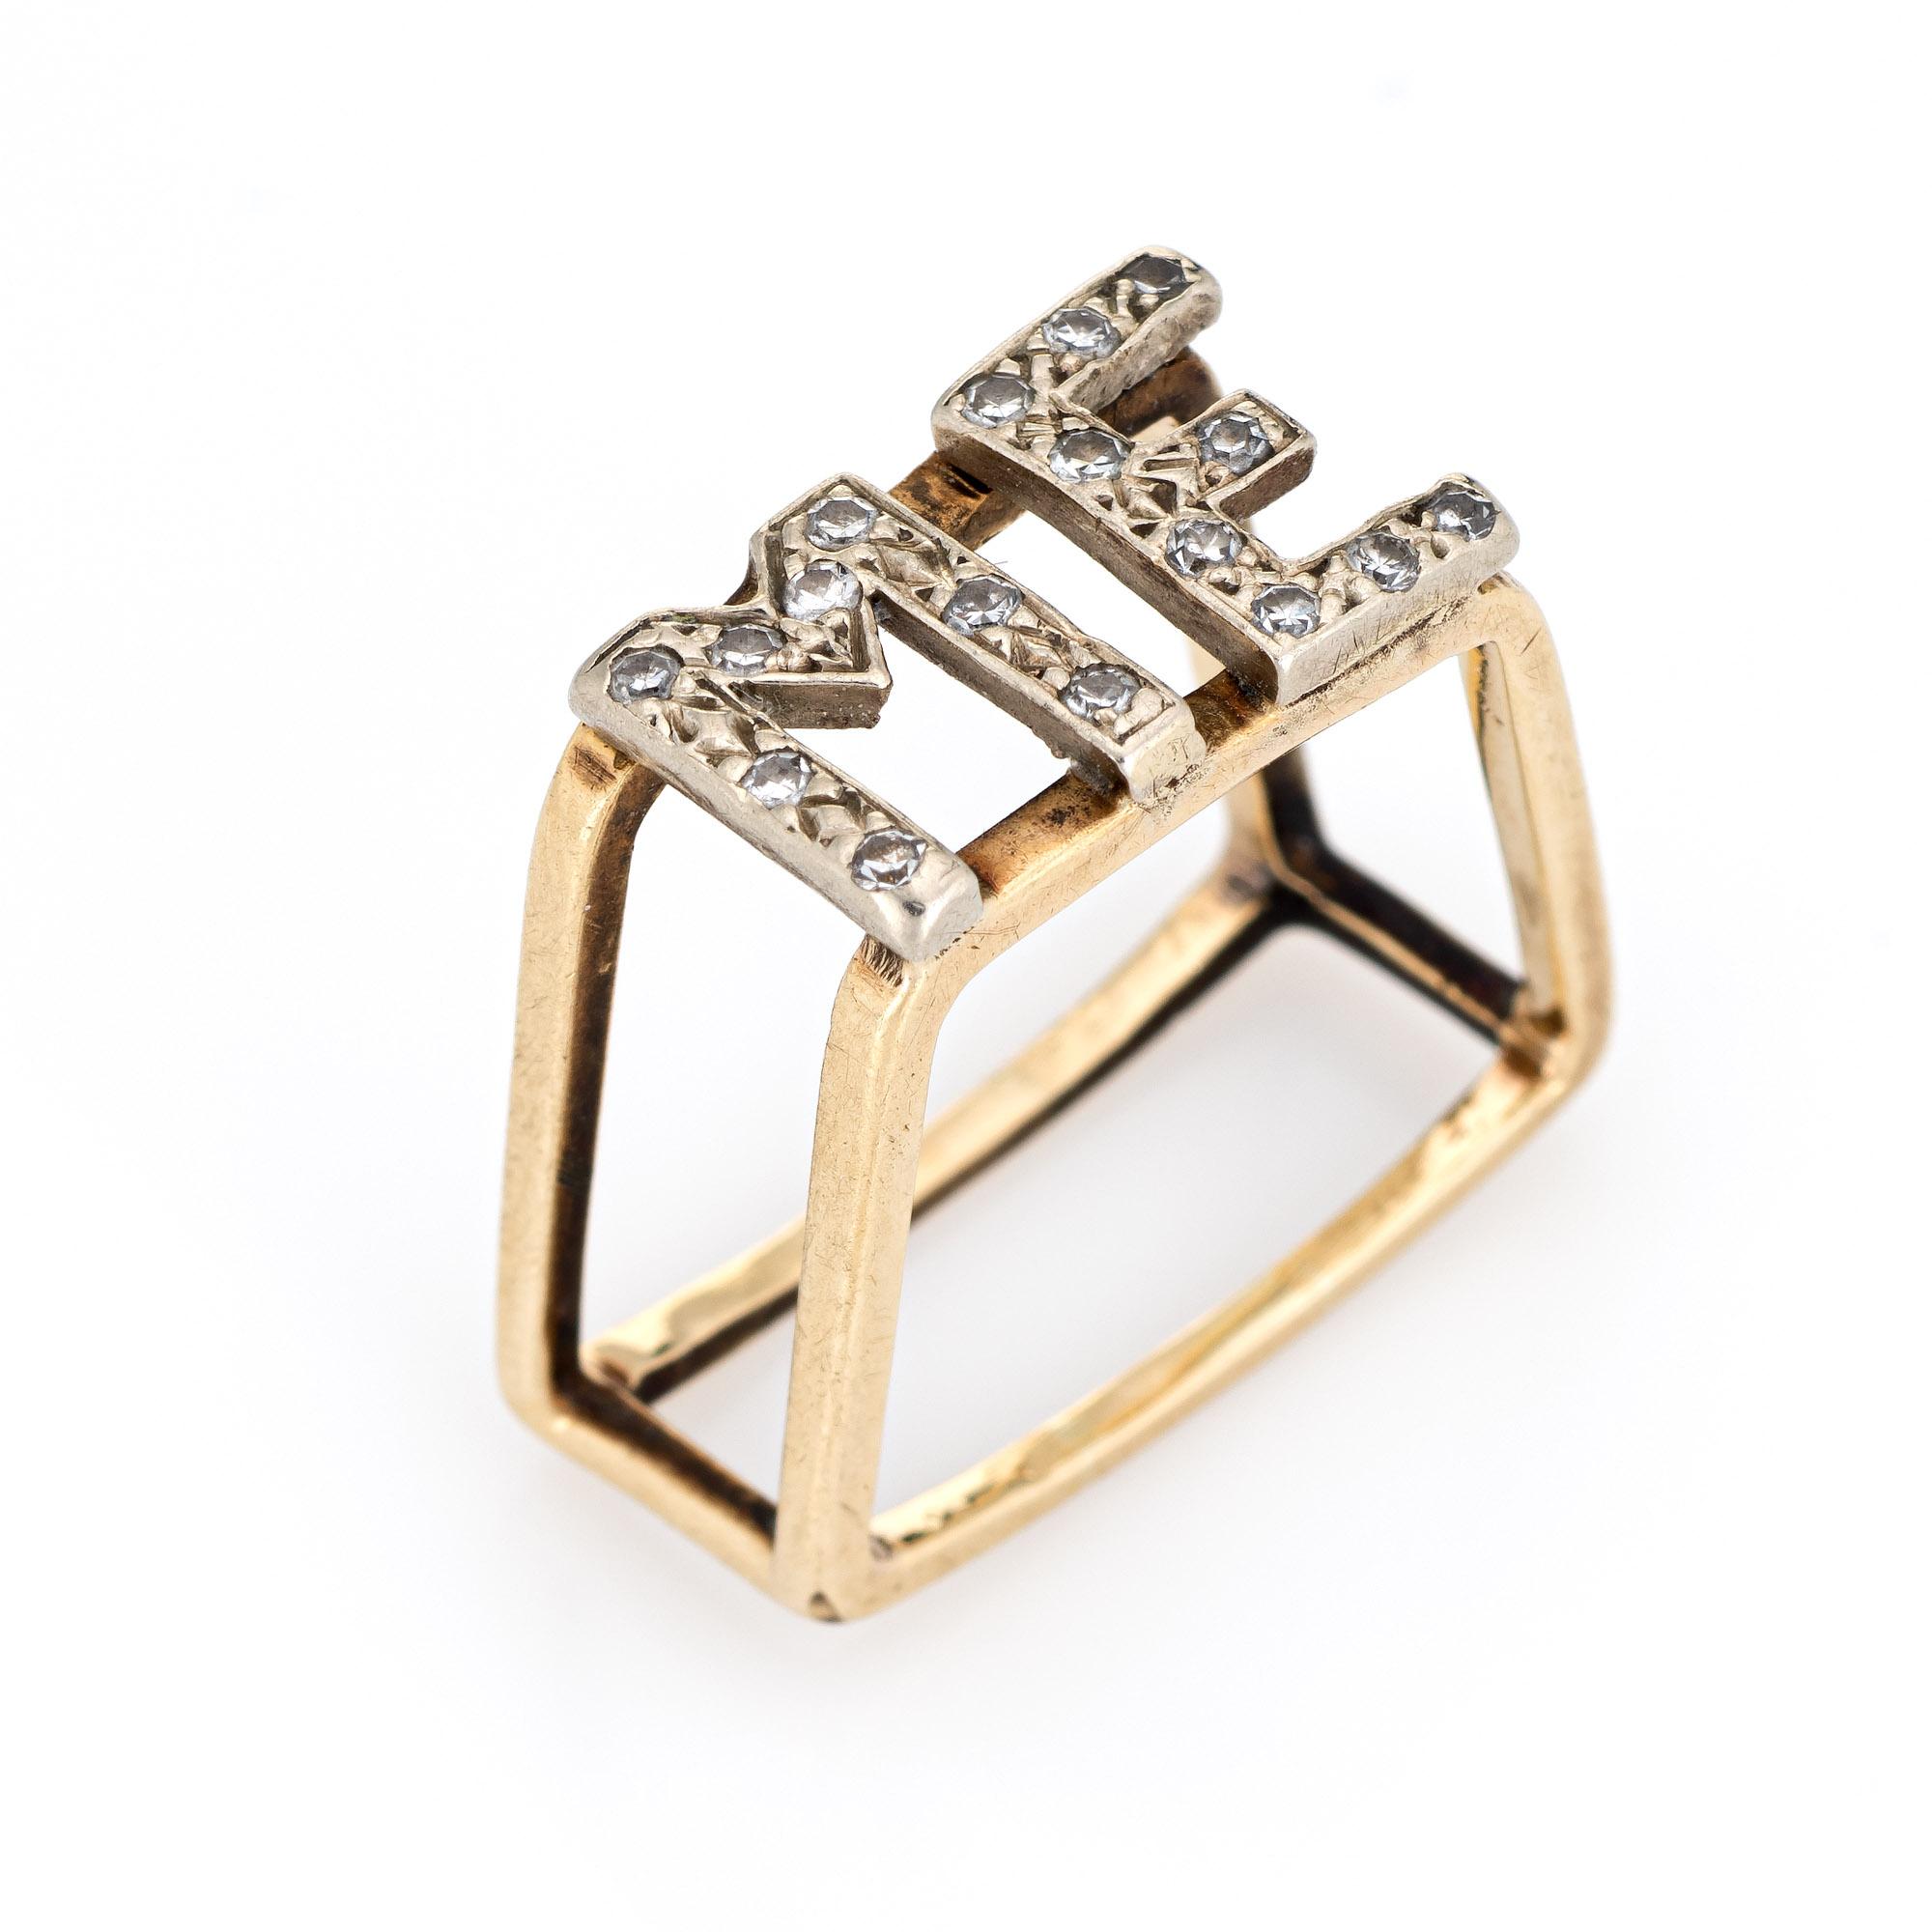 Stylish vintage initial ring crafted in 14 karat yellow gold (circa 1970s). 

16 single cut diamonds total an estimated .08 carats (estimated at I-J color and SI1-I2 clarity).  

The split shank square ring features the letters 